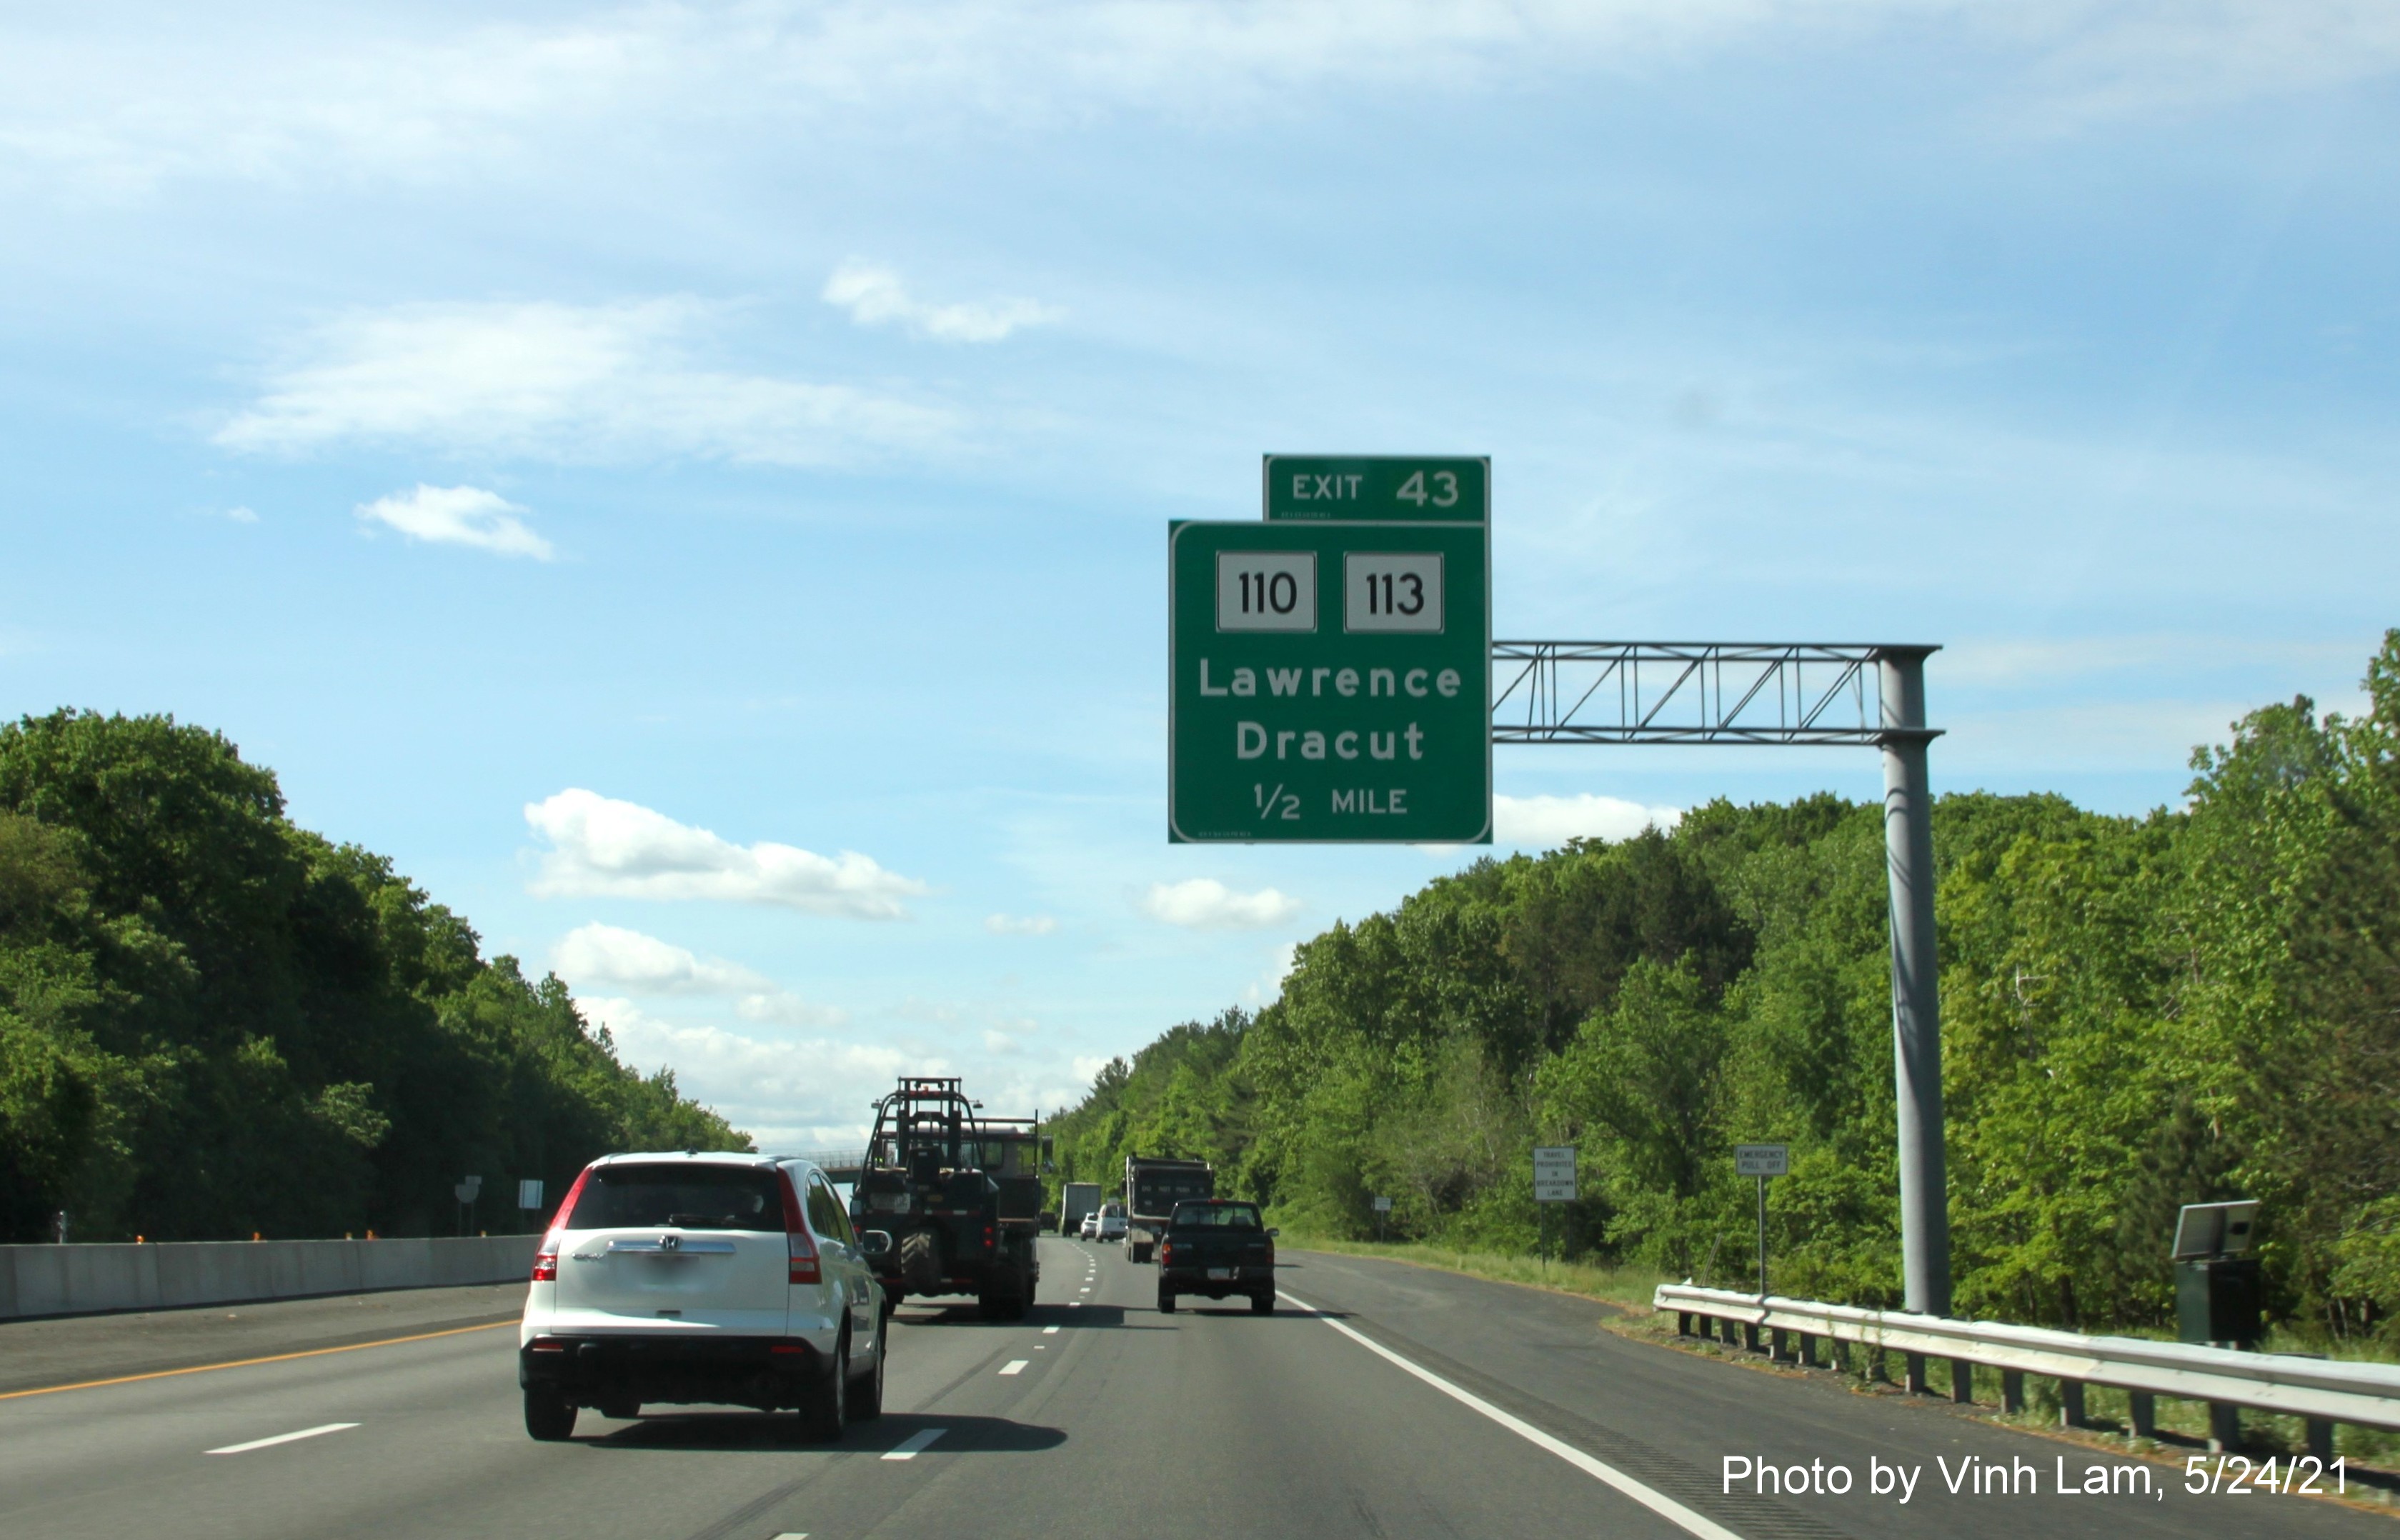 Image of 1/2 mile advance overhead sign for MA 110/113 exit with new milepost based exit number on I-93 South in Andover, by Vinh Lam, May 2021